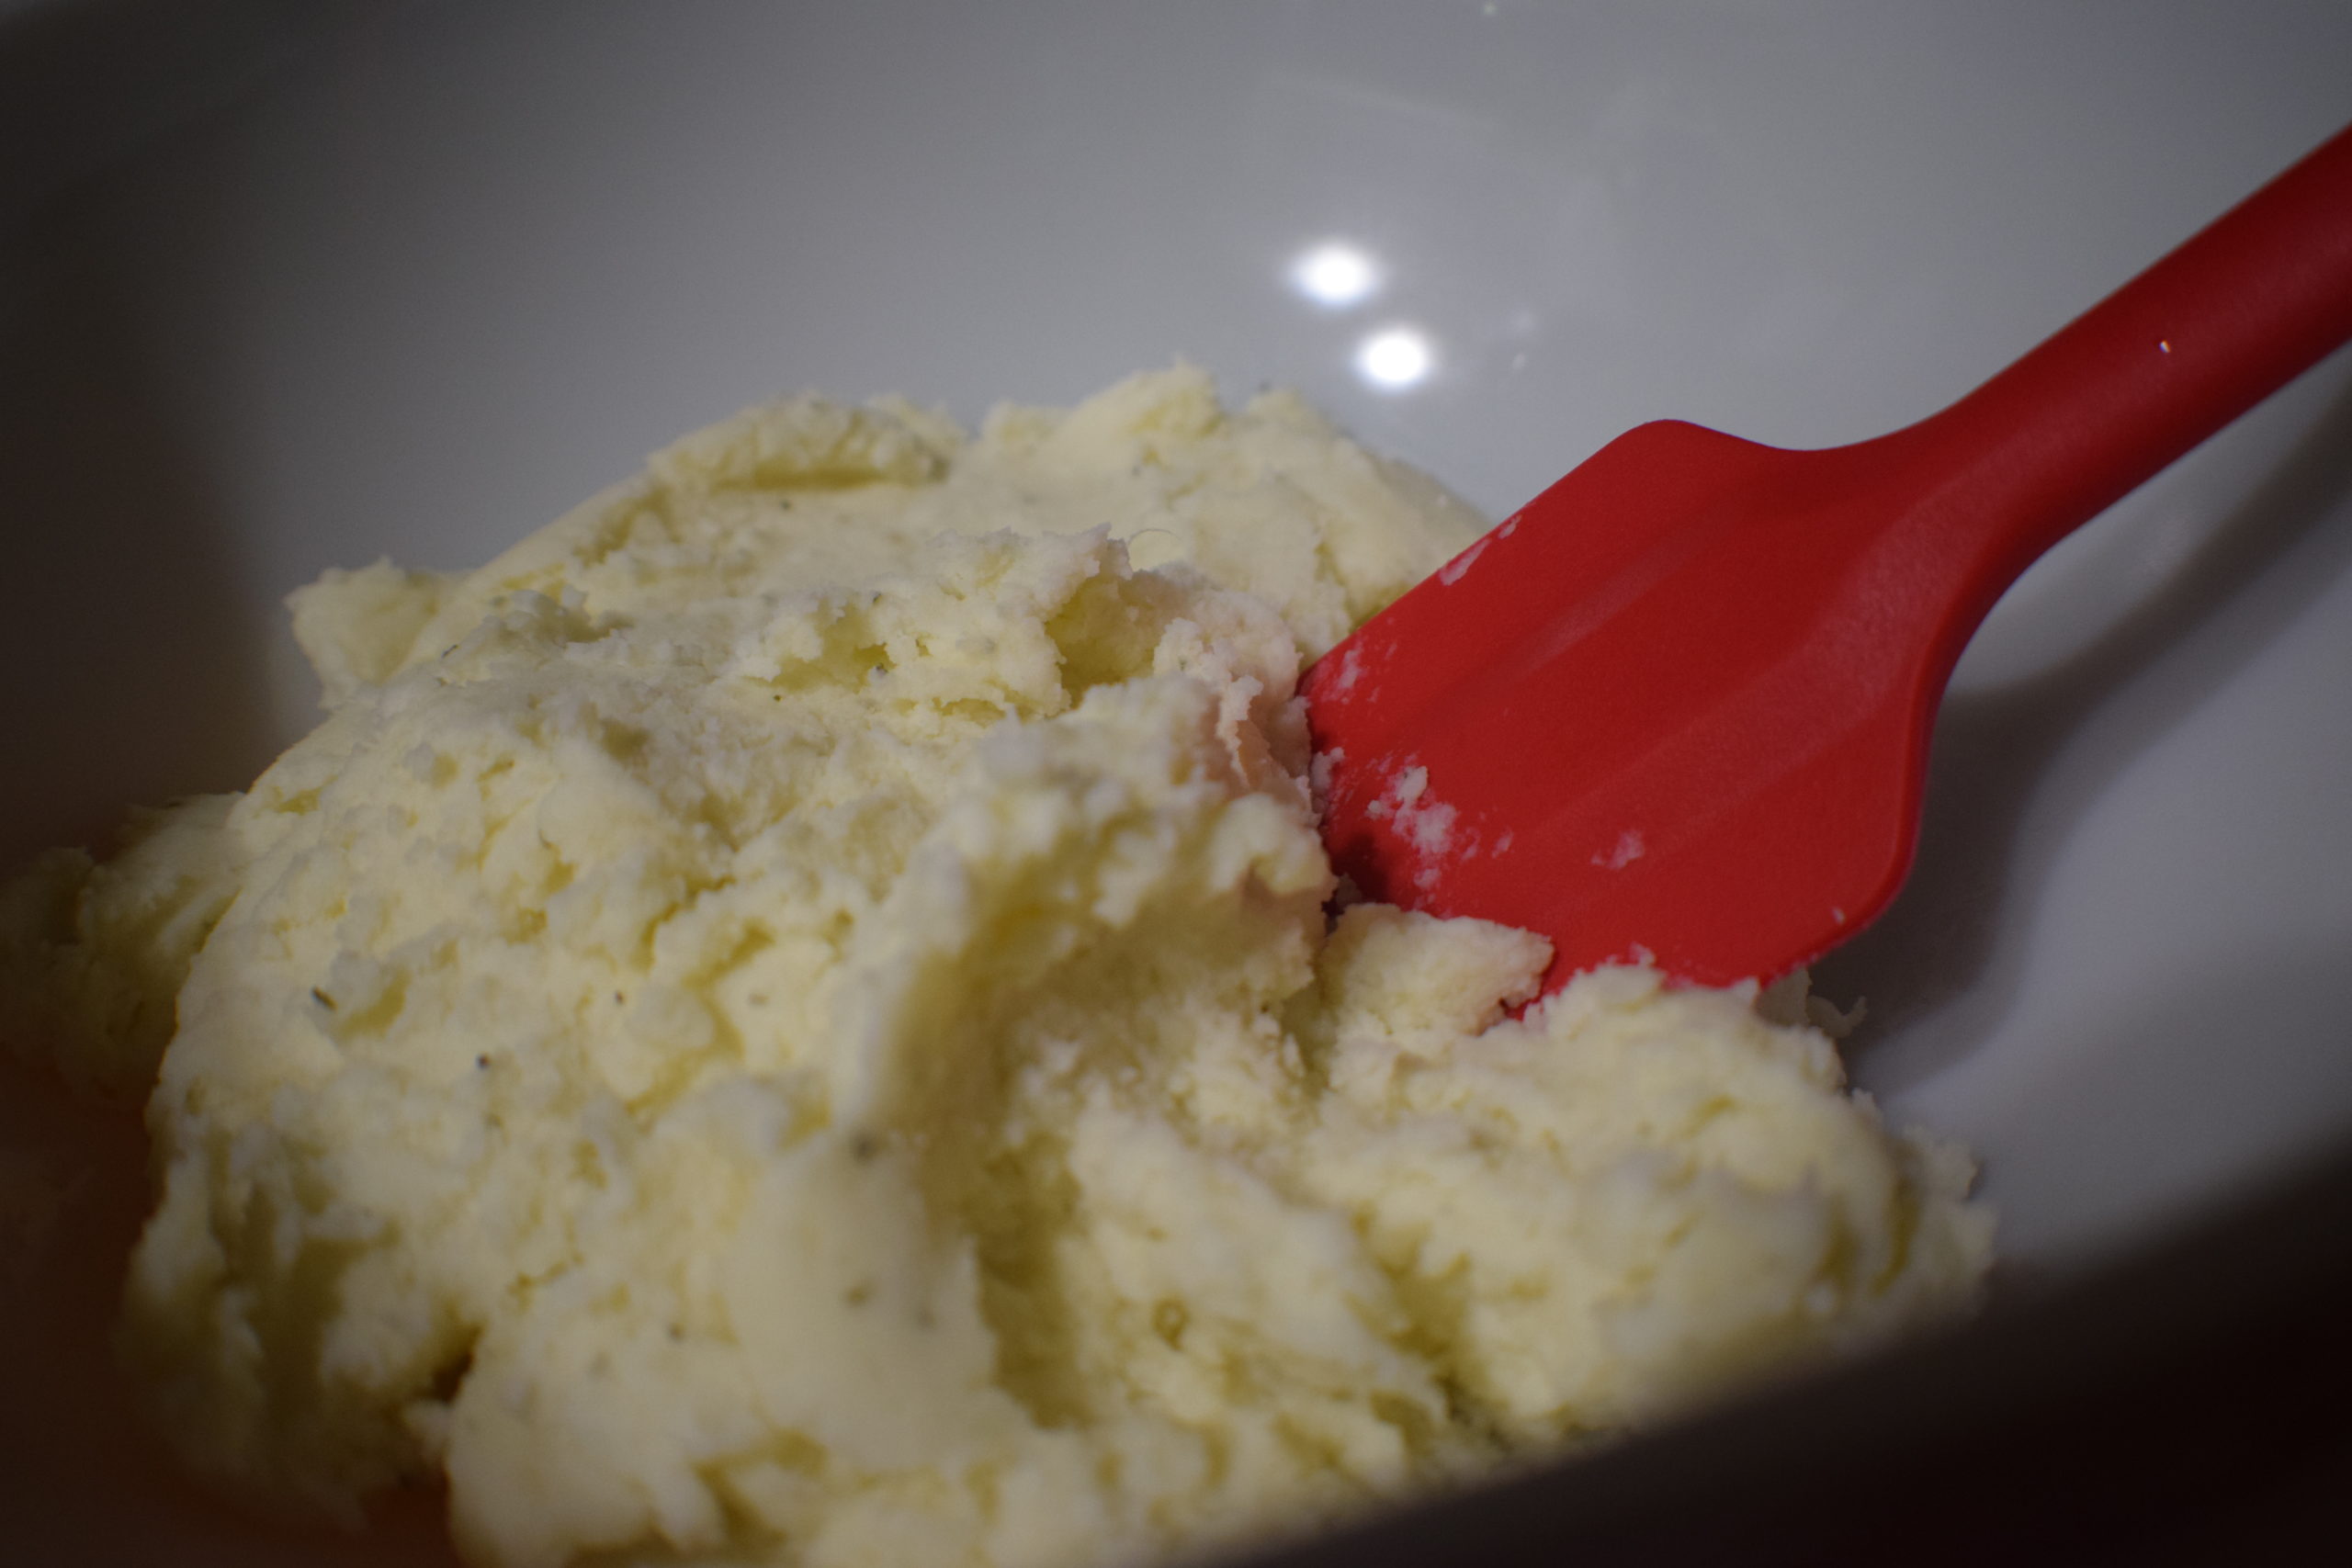 mashed potatoes in a white bowl with red spoon